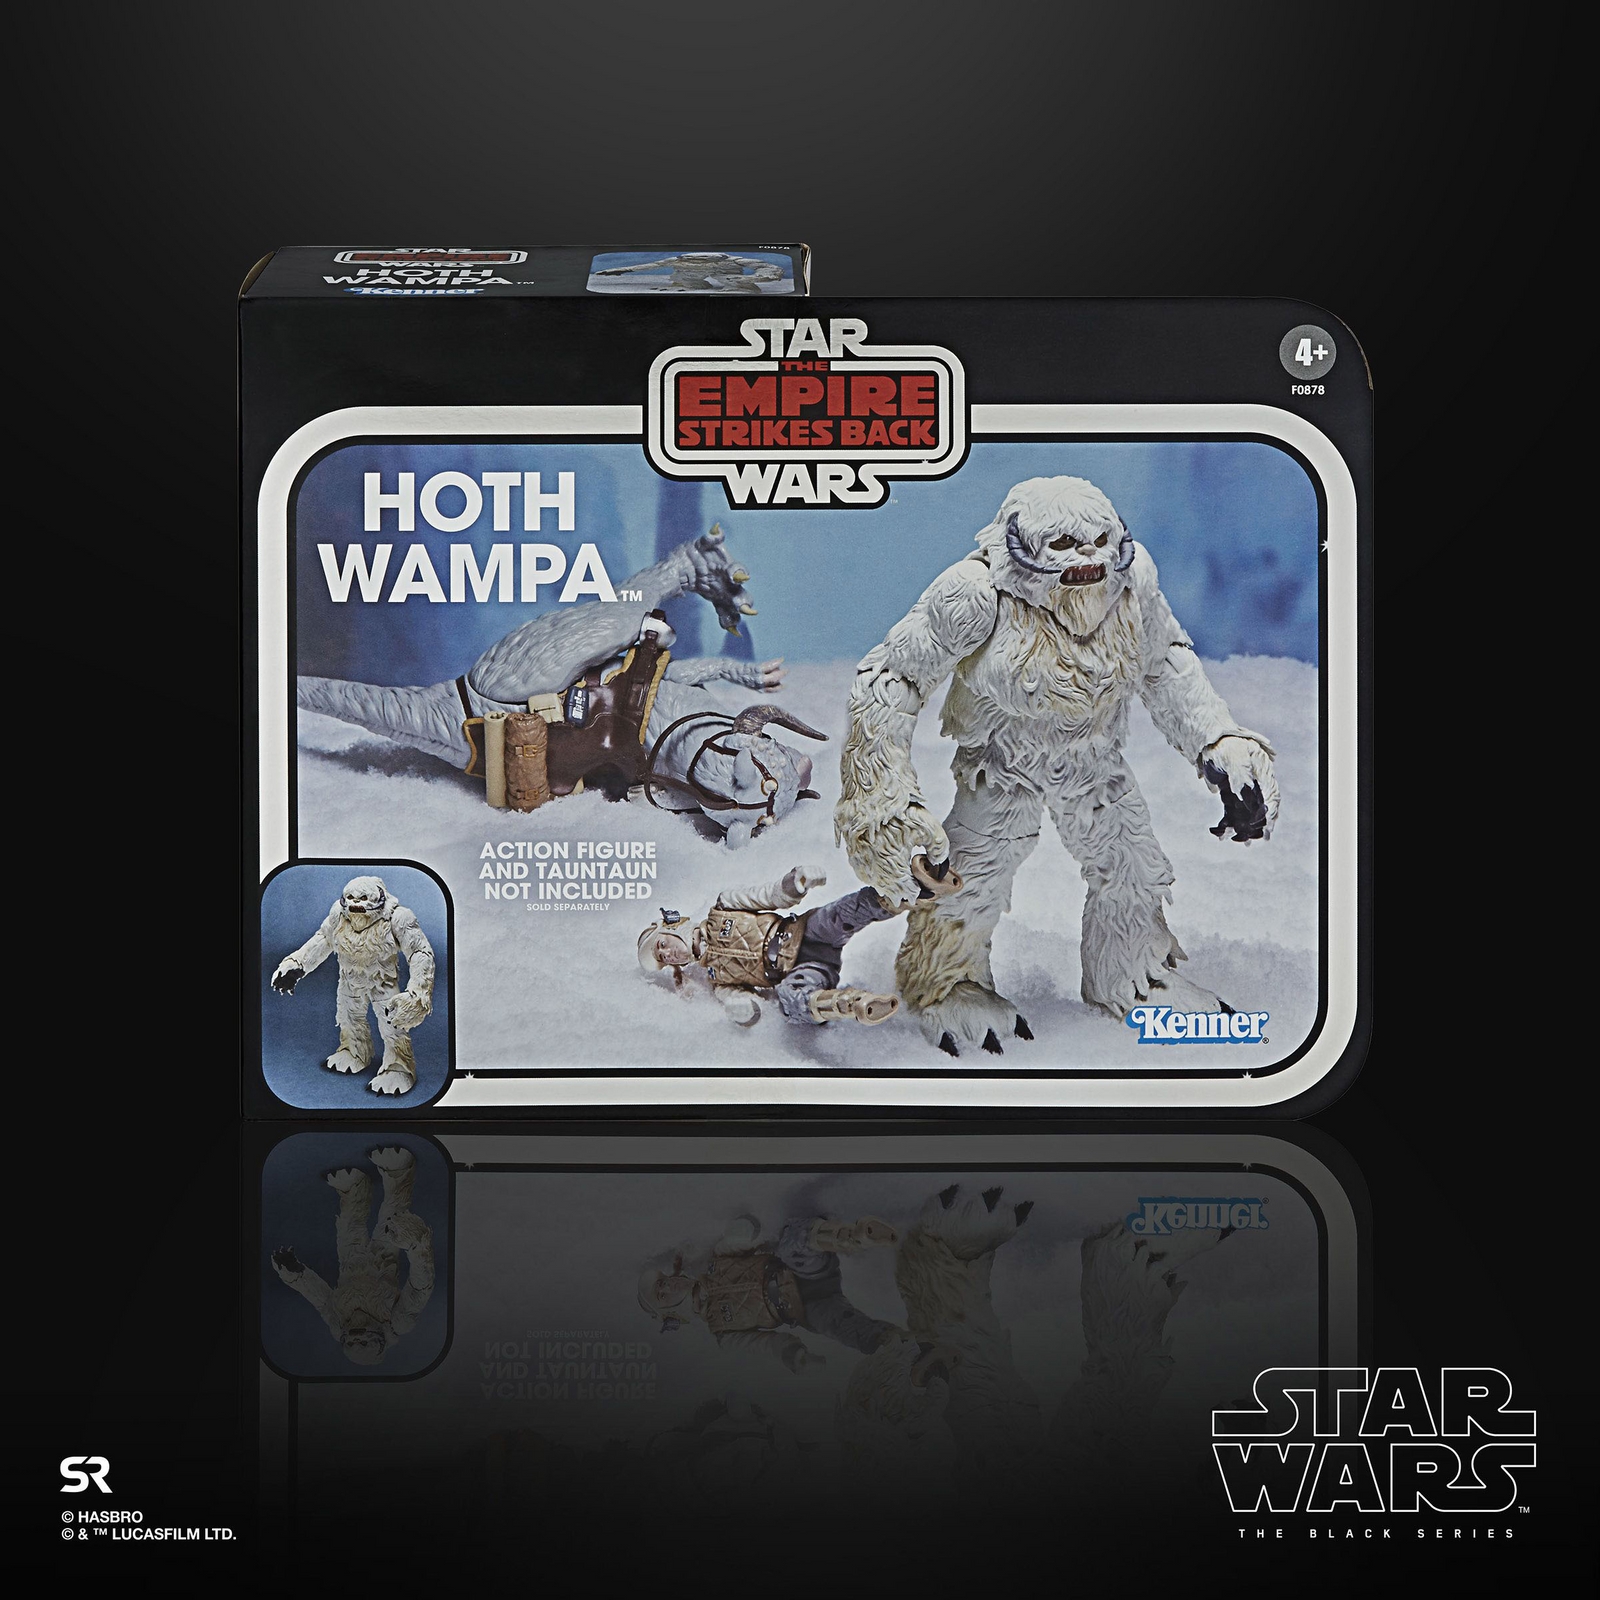 Star-Wars-The-Black-Series-6-Inch-Scale-Hoth-Wampa-Figure-Box-Packaging-Front.jpg